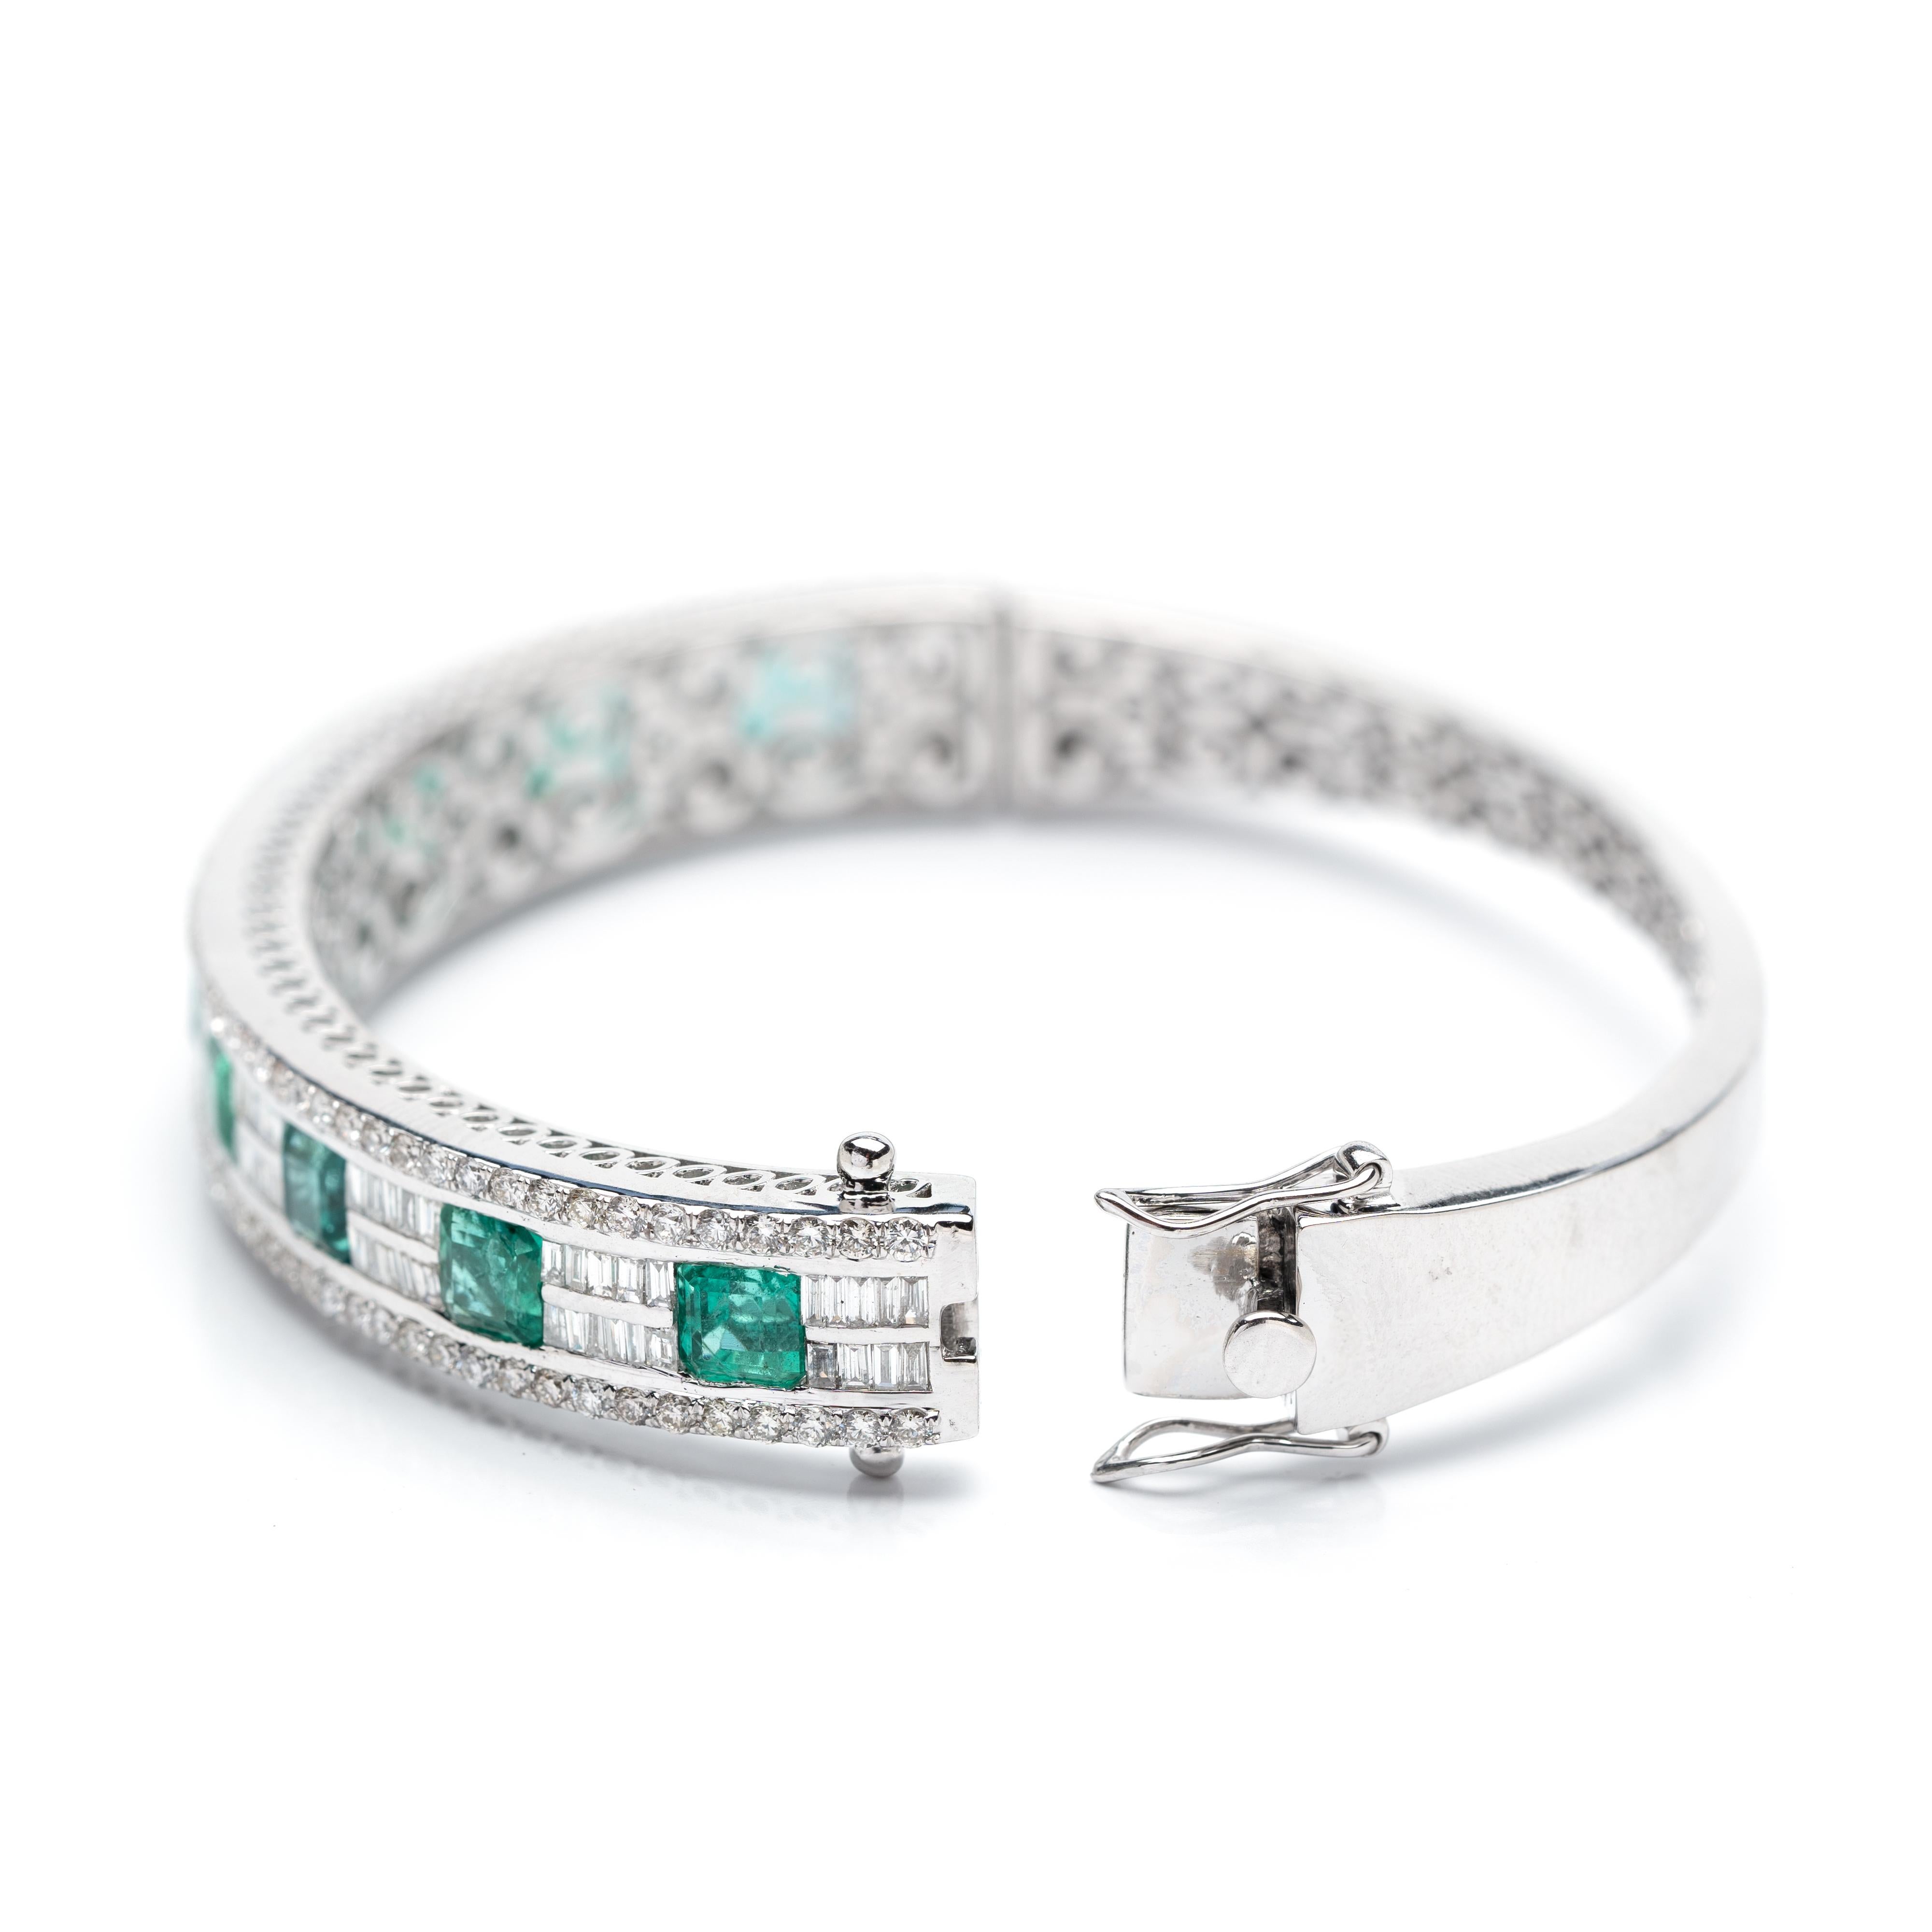 Emerald Cut Natural Zambian Emerald Bracelet with 6.18 Carats Emerald and 3.05 Carats For Sale